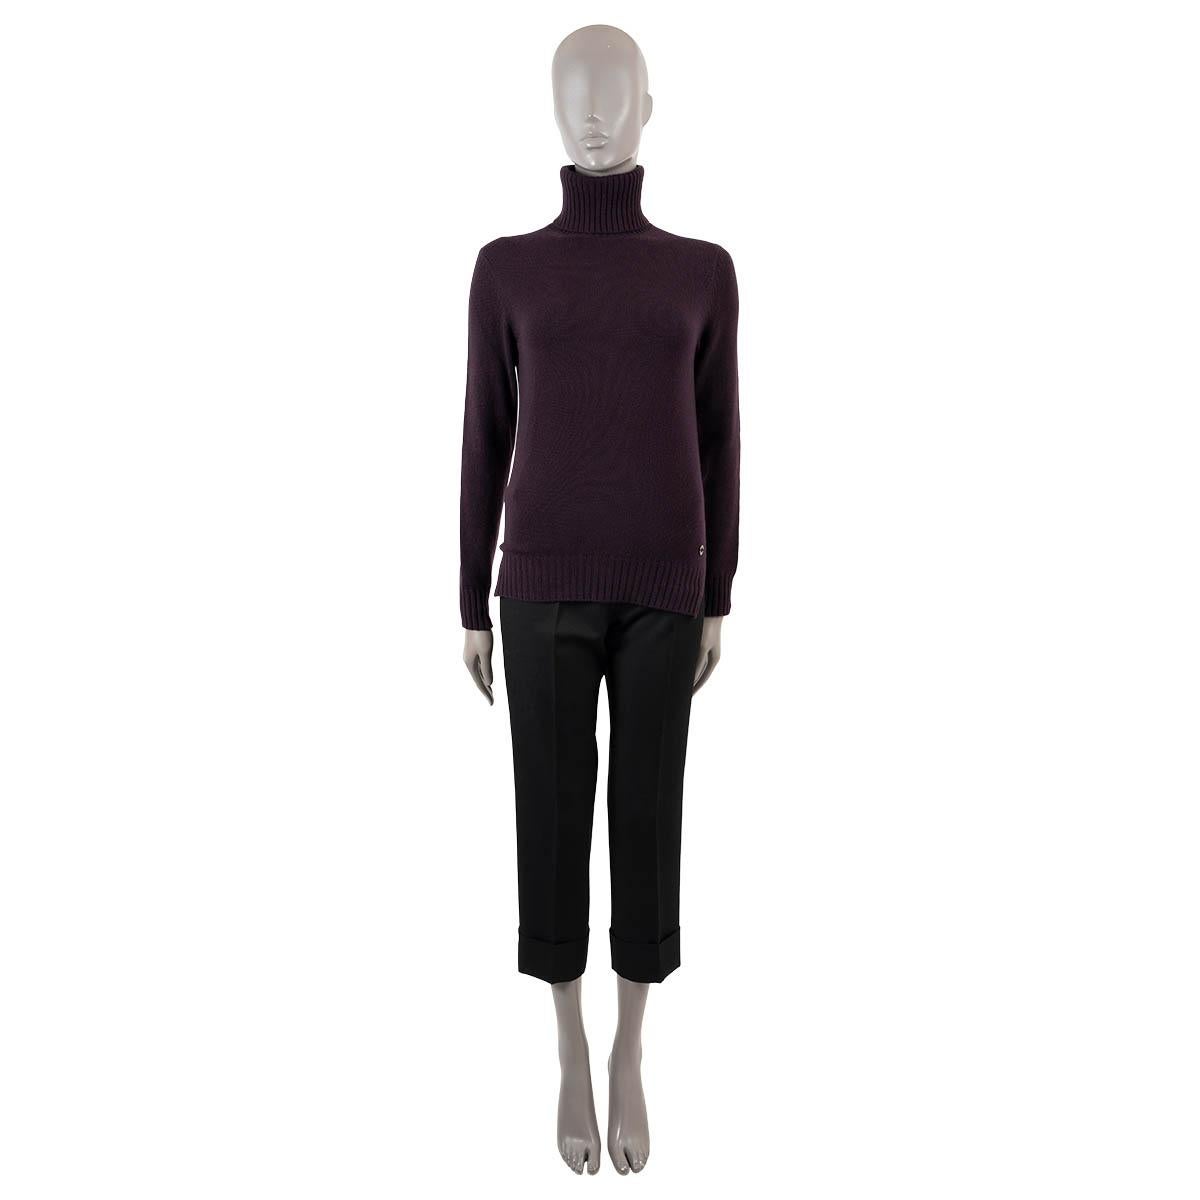 100% authentic Loro Piana Parksville turtleneck sweater in plum baby cashmere (100%). Features metal logo detail at the waist, a split hem, rib knit neck, cuffs and hem. Has been worn and is in excellent condition.

Measurements
Tag